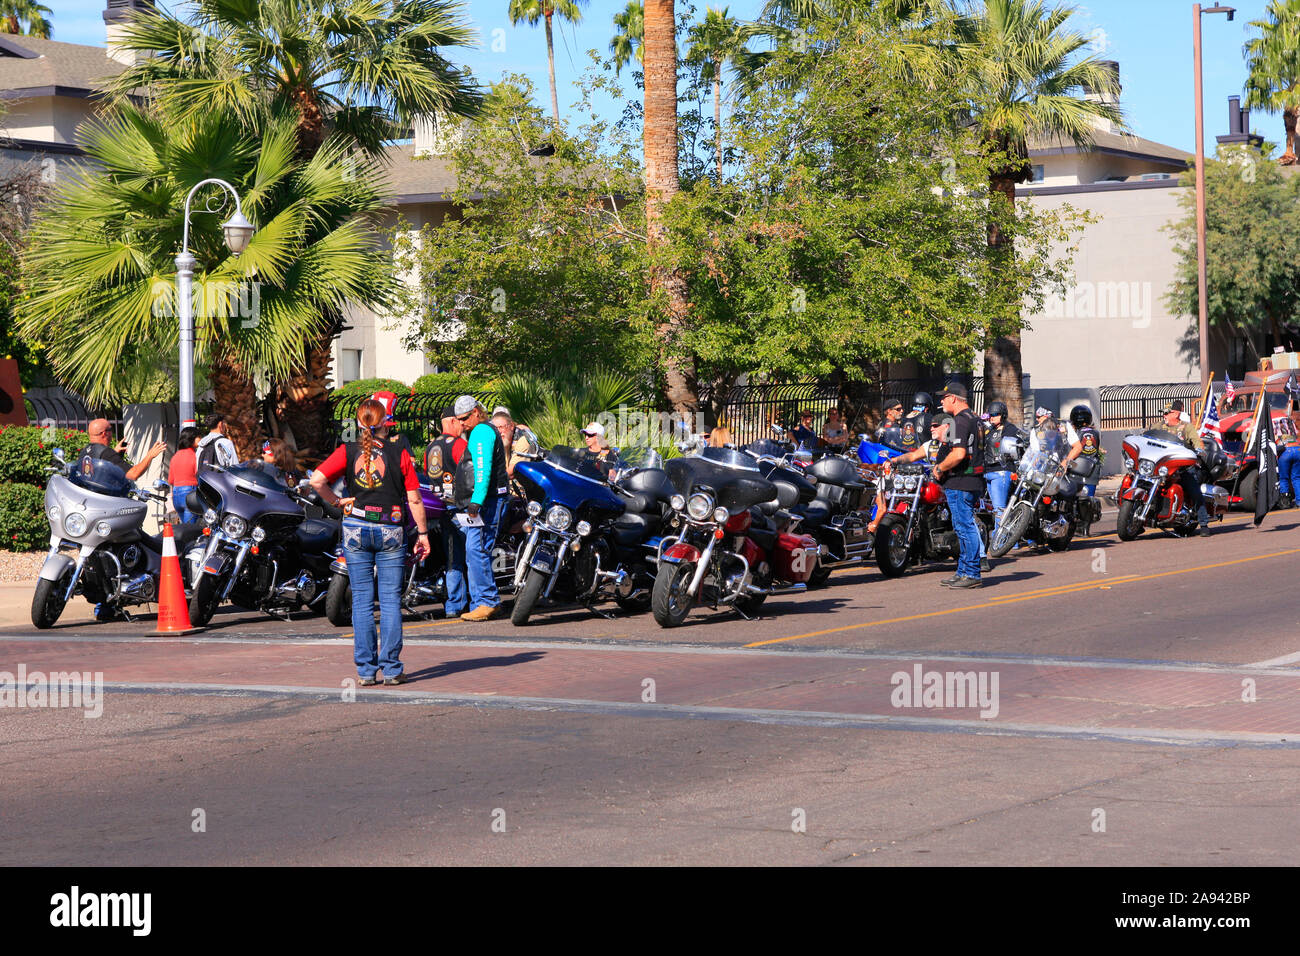 Biker group ready to ride on a weekend tour through Arizona where the sun shines over 300 days per year Stock Photo